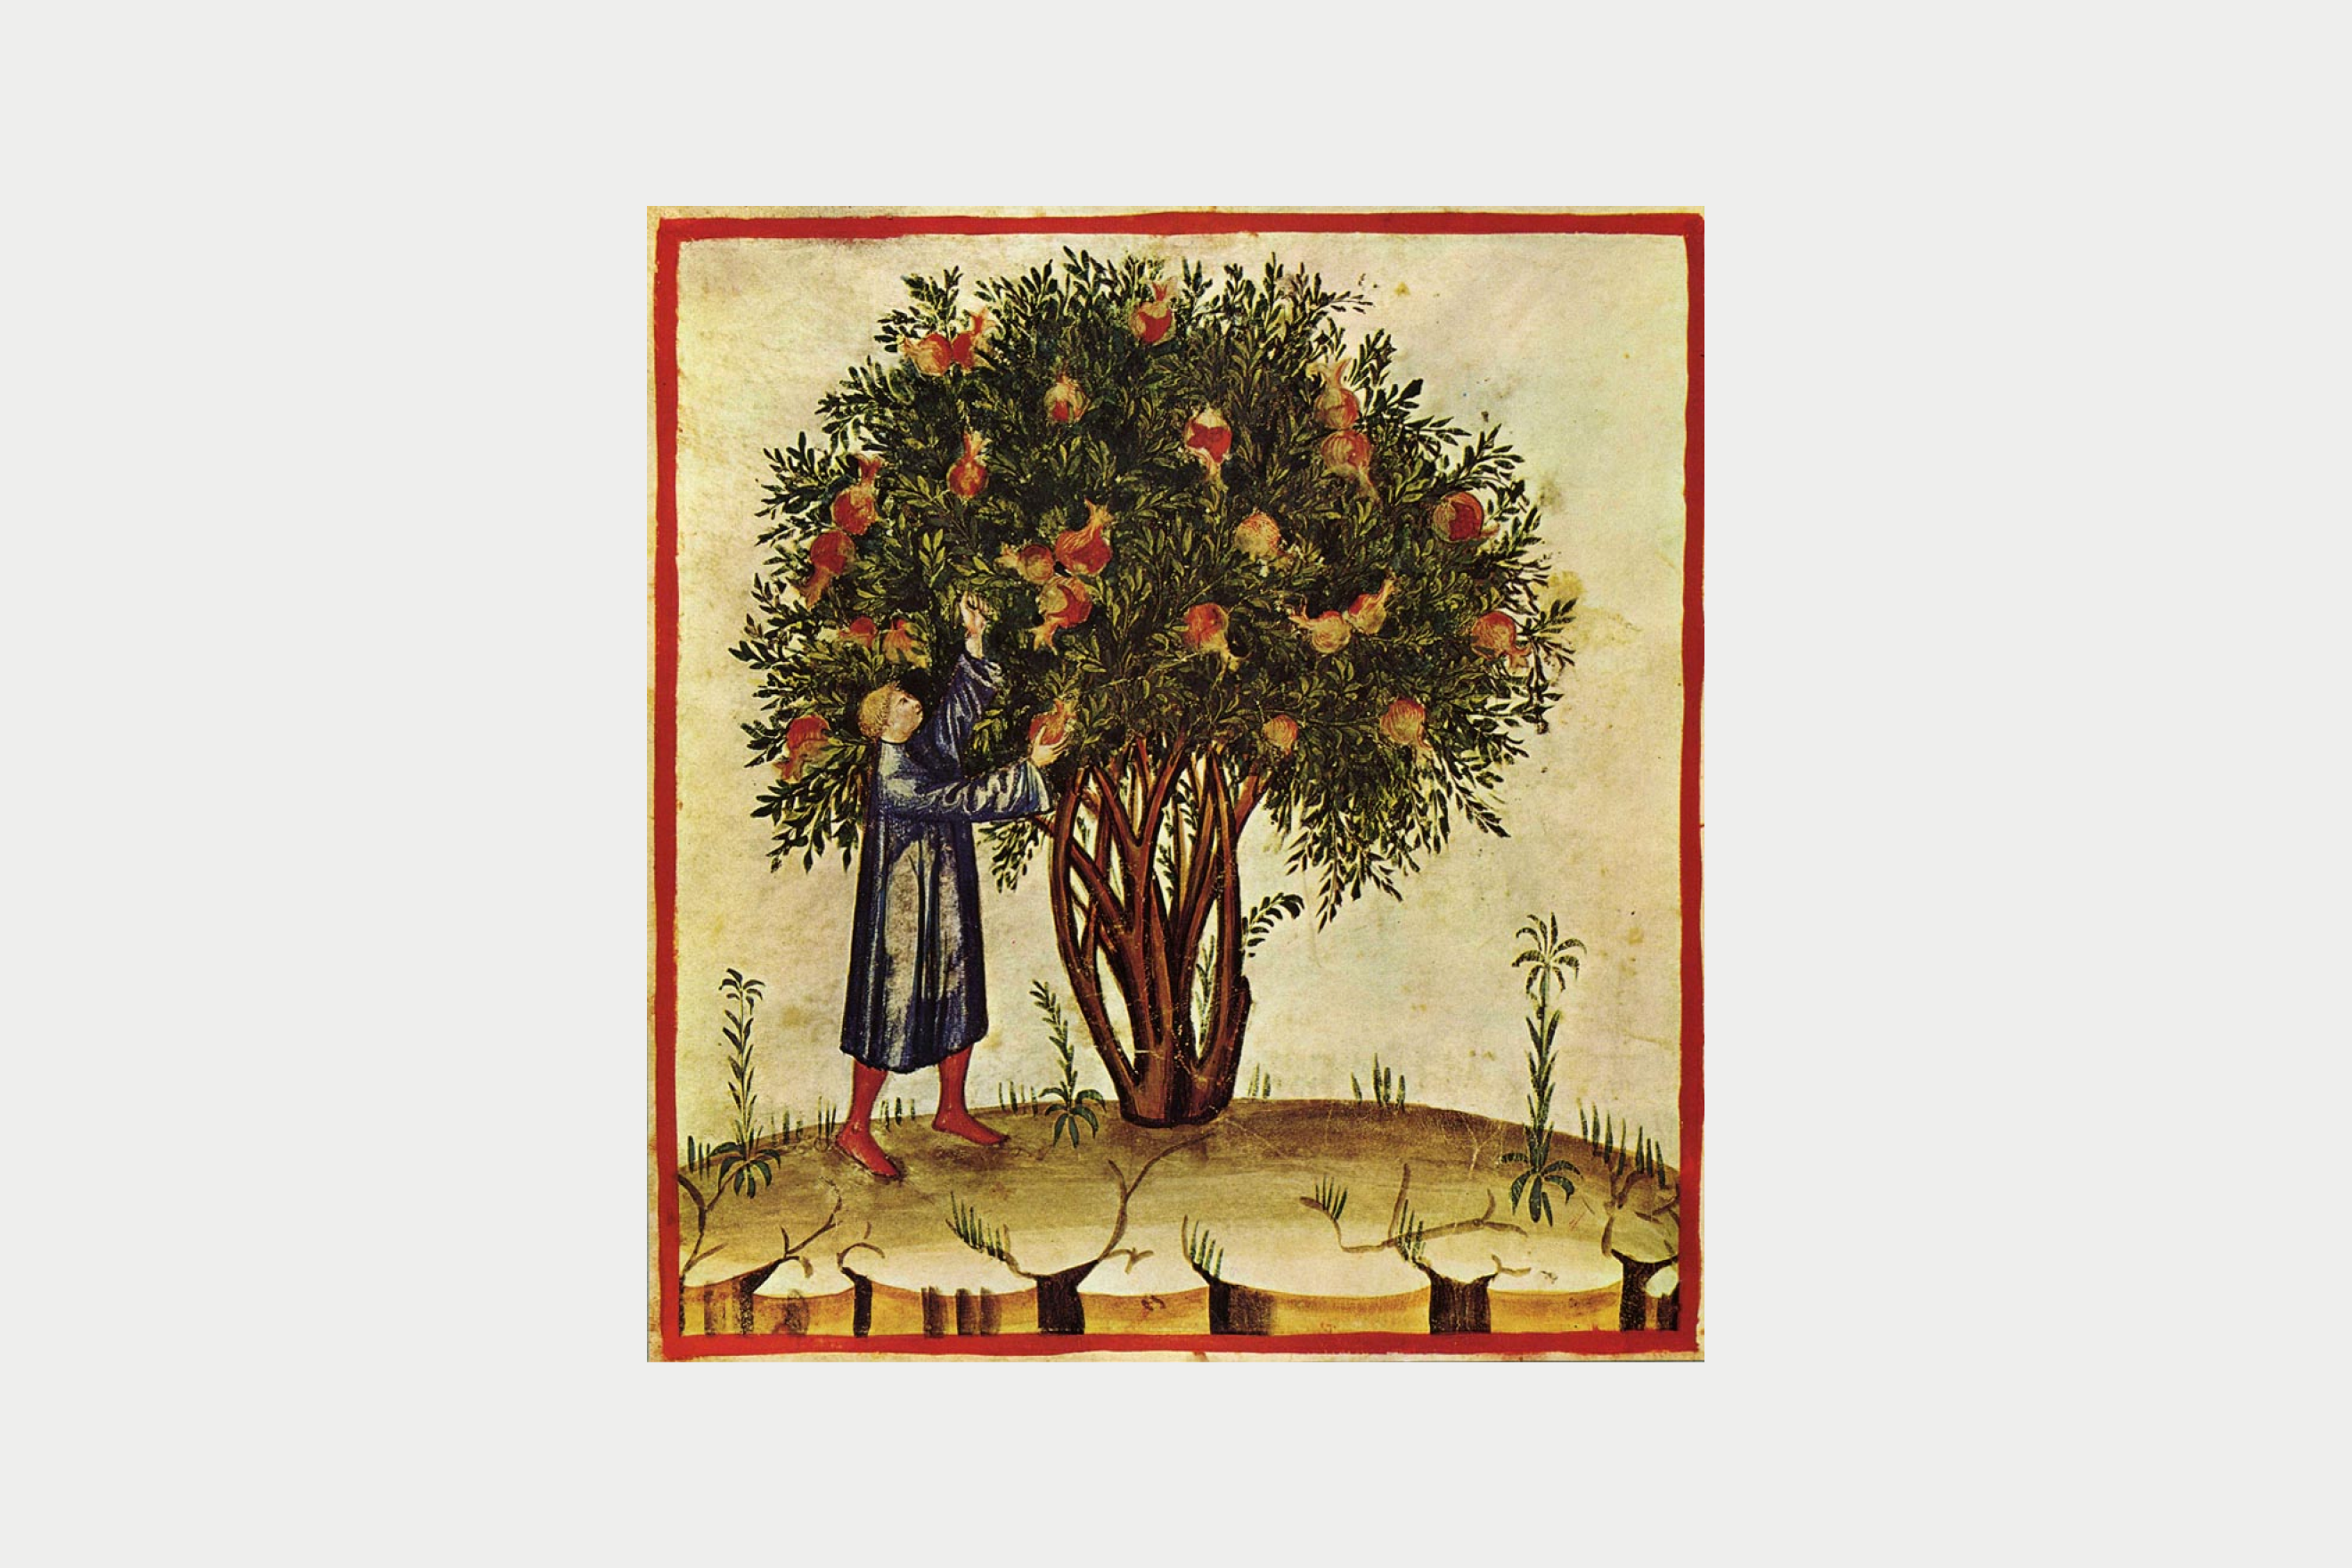 A pomegranate tree in an illustration for the Tacuinum Sanitatis, made in Lombardy, late 14th century (Biblioteca Casanatense, Rome)